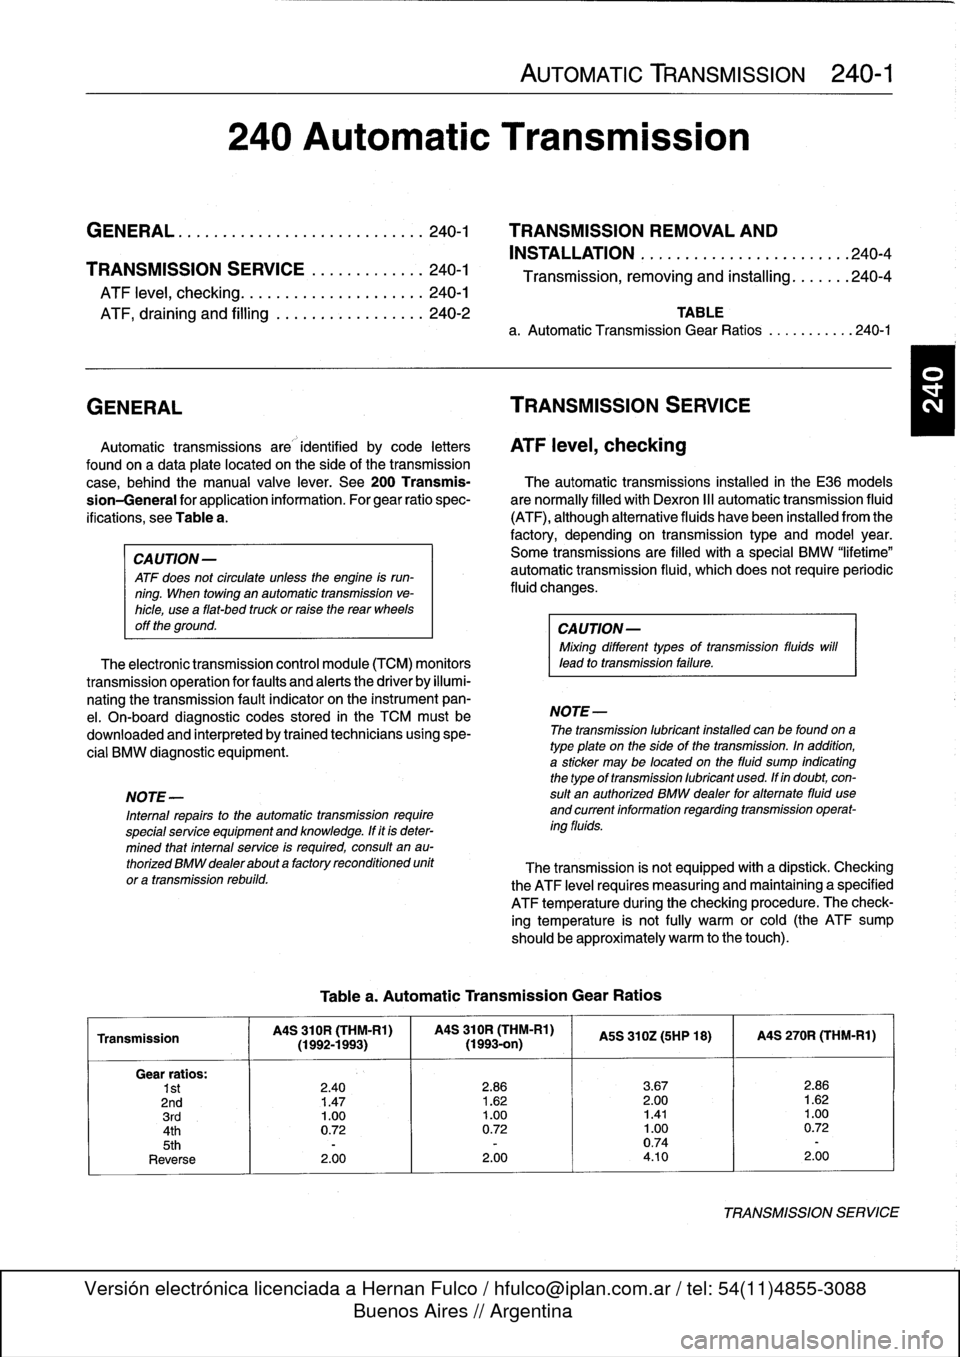 BMW 328i 1995 E36 Workshop Manual 
AUTOMATIC
TRANSMISSION

	

240-1

240
Automatic
Transmission

GENERAL
.....
.
.
.
.
.
.
.
.
.
.
.
.
.
.........
.
240-1

	

TRANSMISSION
REMOVAL
AND

INSTALLATION
..................
.
.
.
.
.240-4
TR